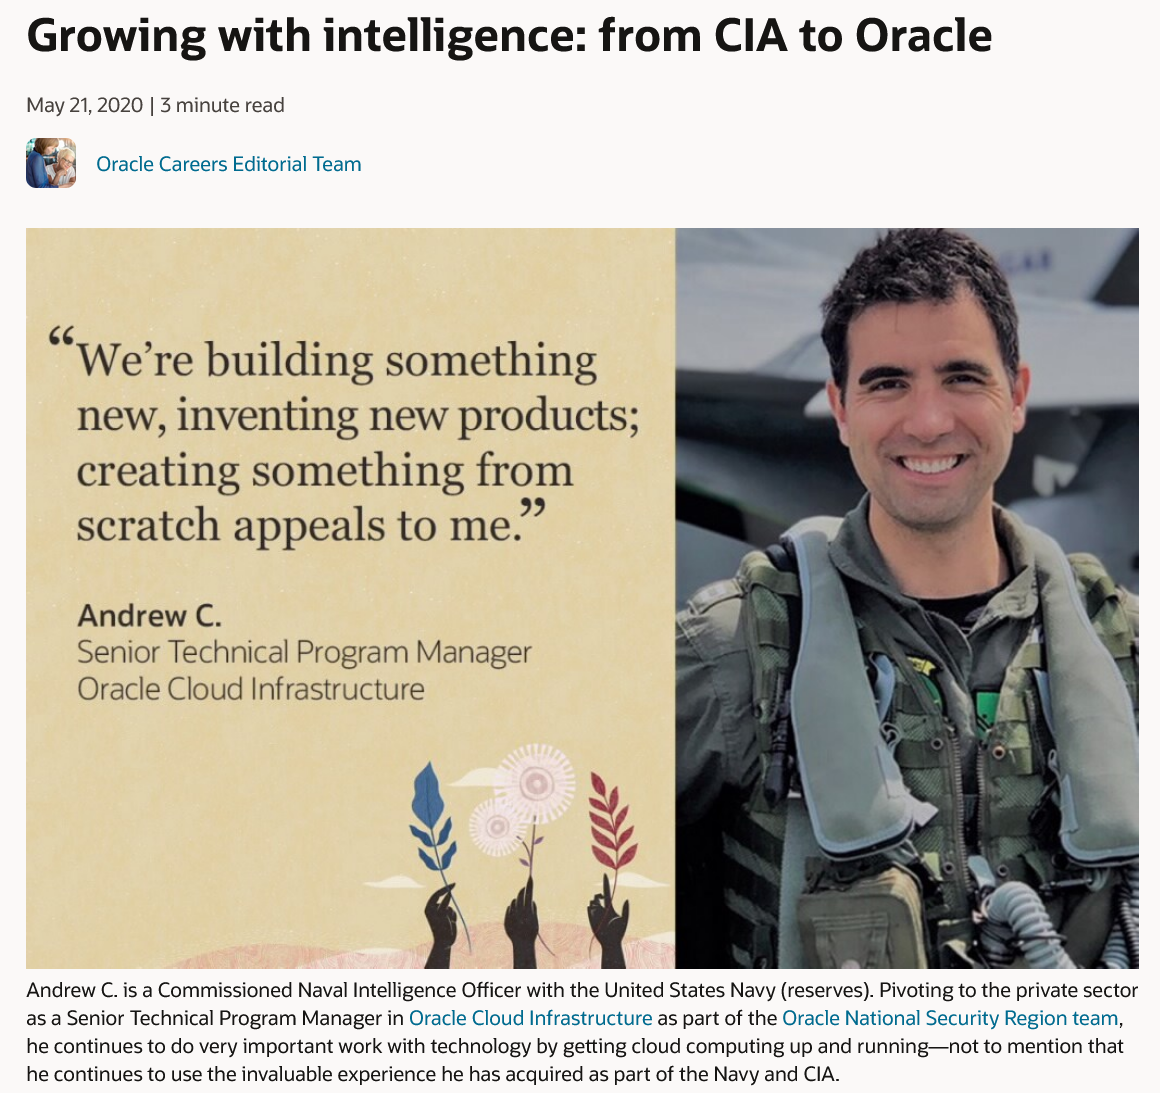 Oracle, a firm that stores reams of your sensitive data, openly boasts of its cozy ties to the CIA.